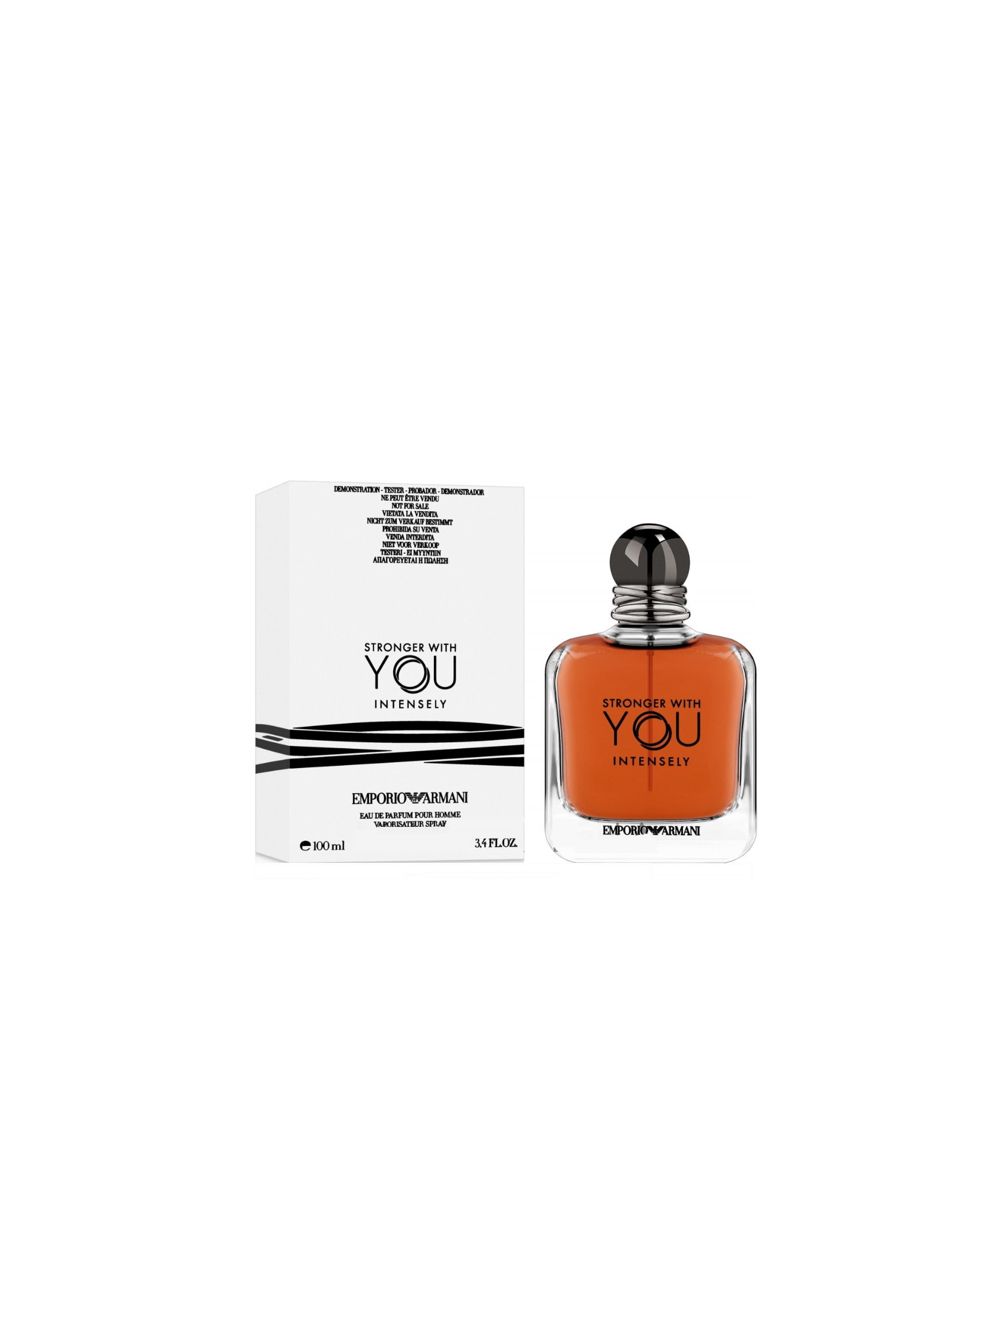 Emporio Armani Stronger With You Intensely EDP For Men -100ml (tester)